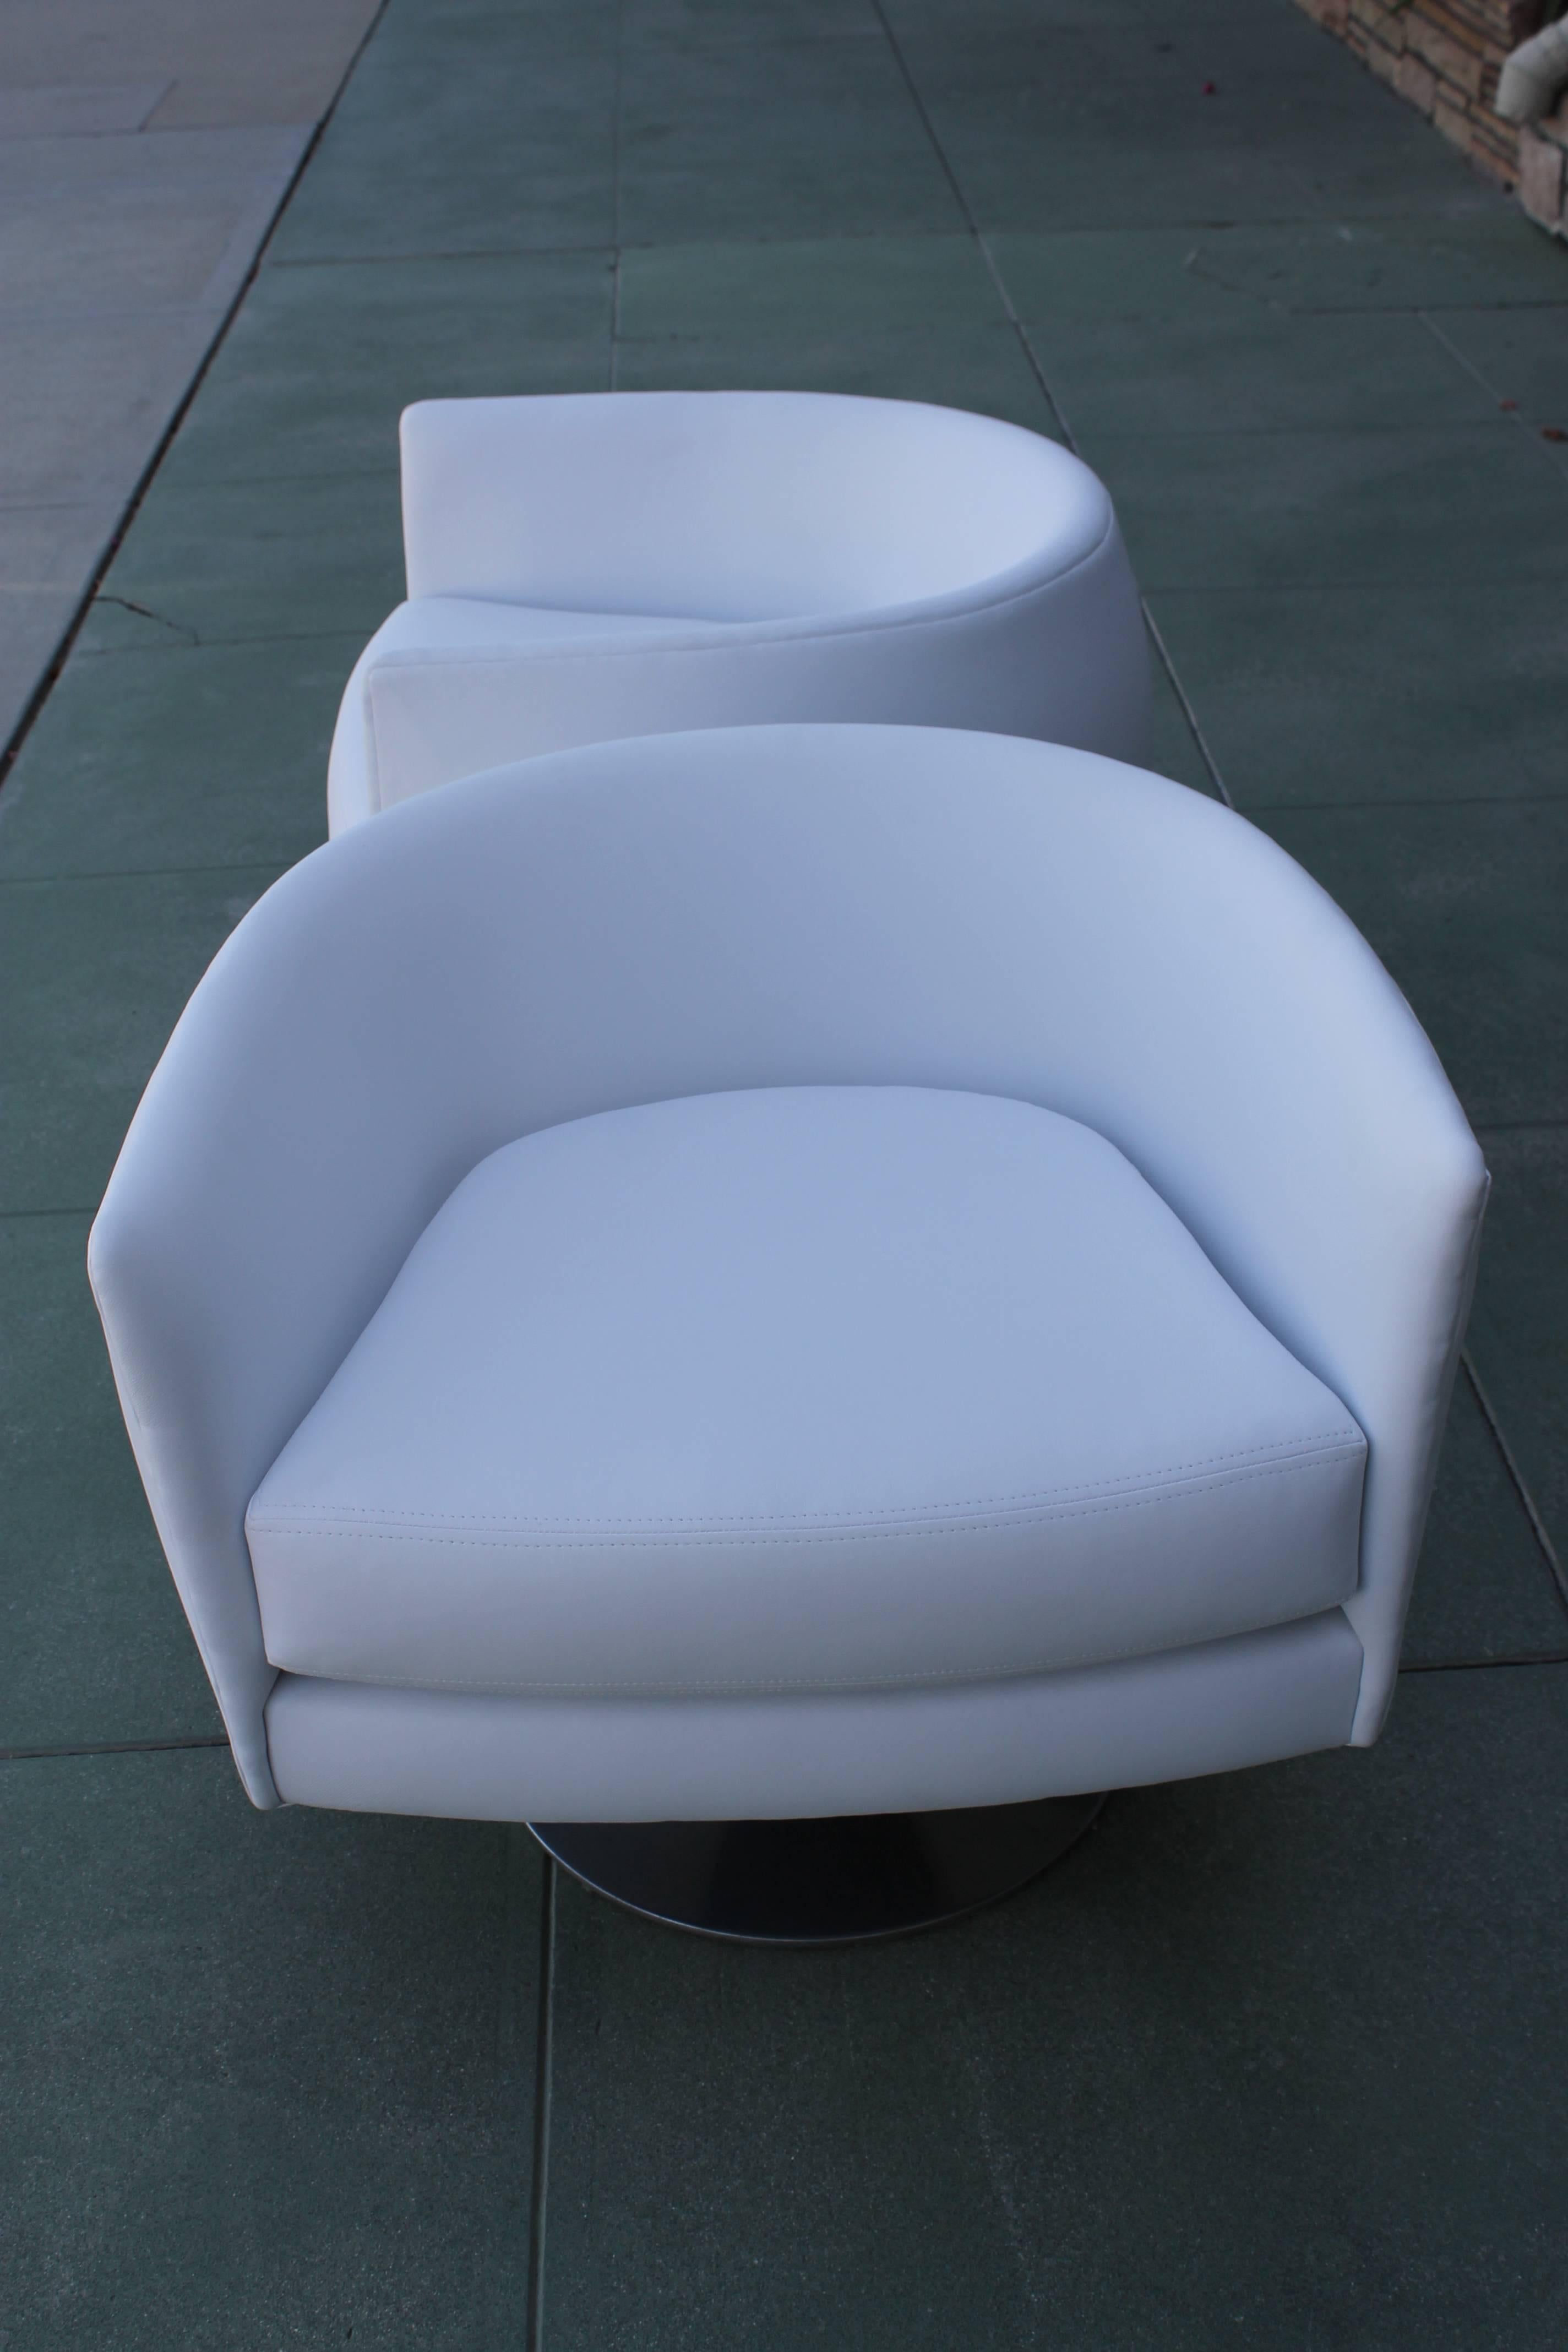 Mid-20th Century Pair of Lounge Chairs, style of Milo Baughman